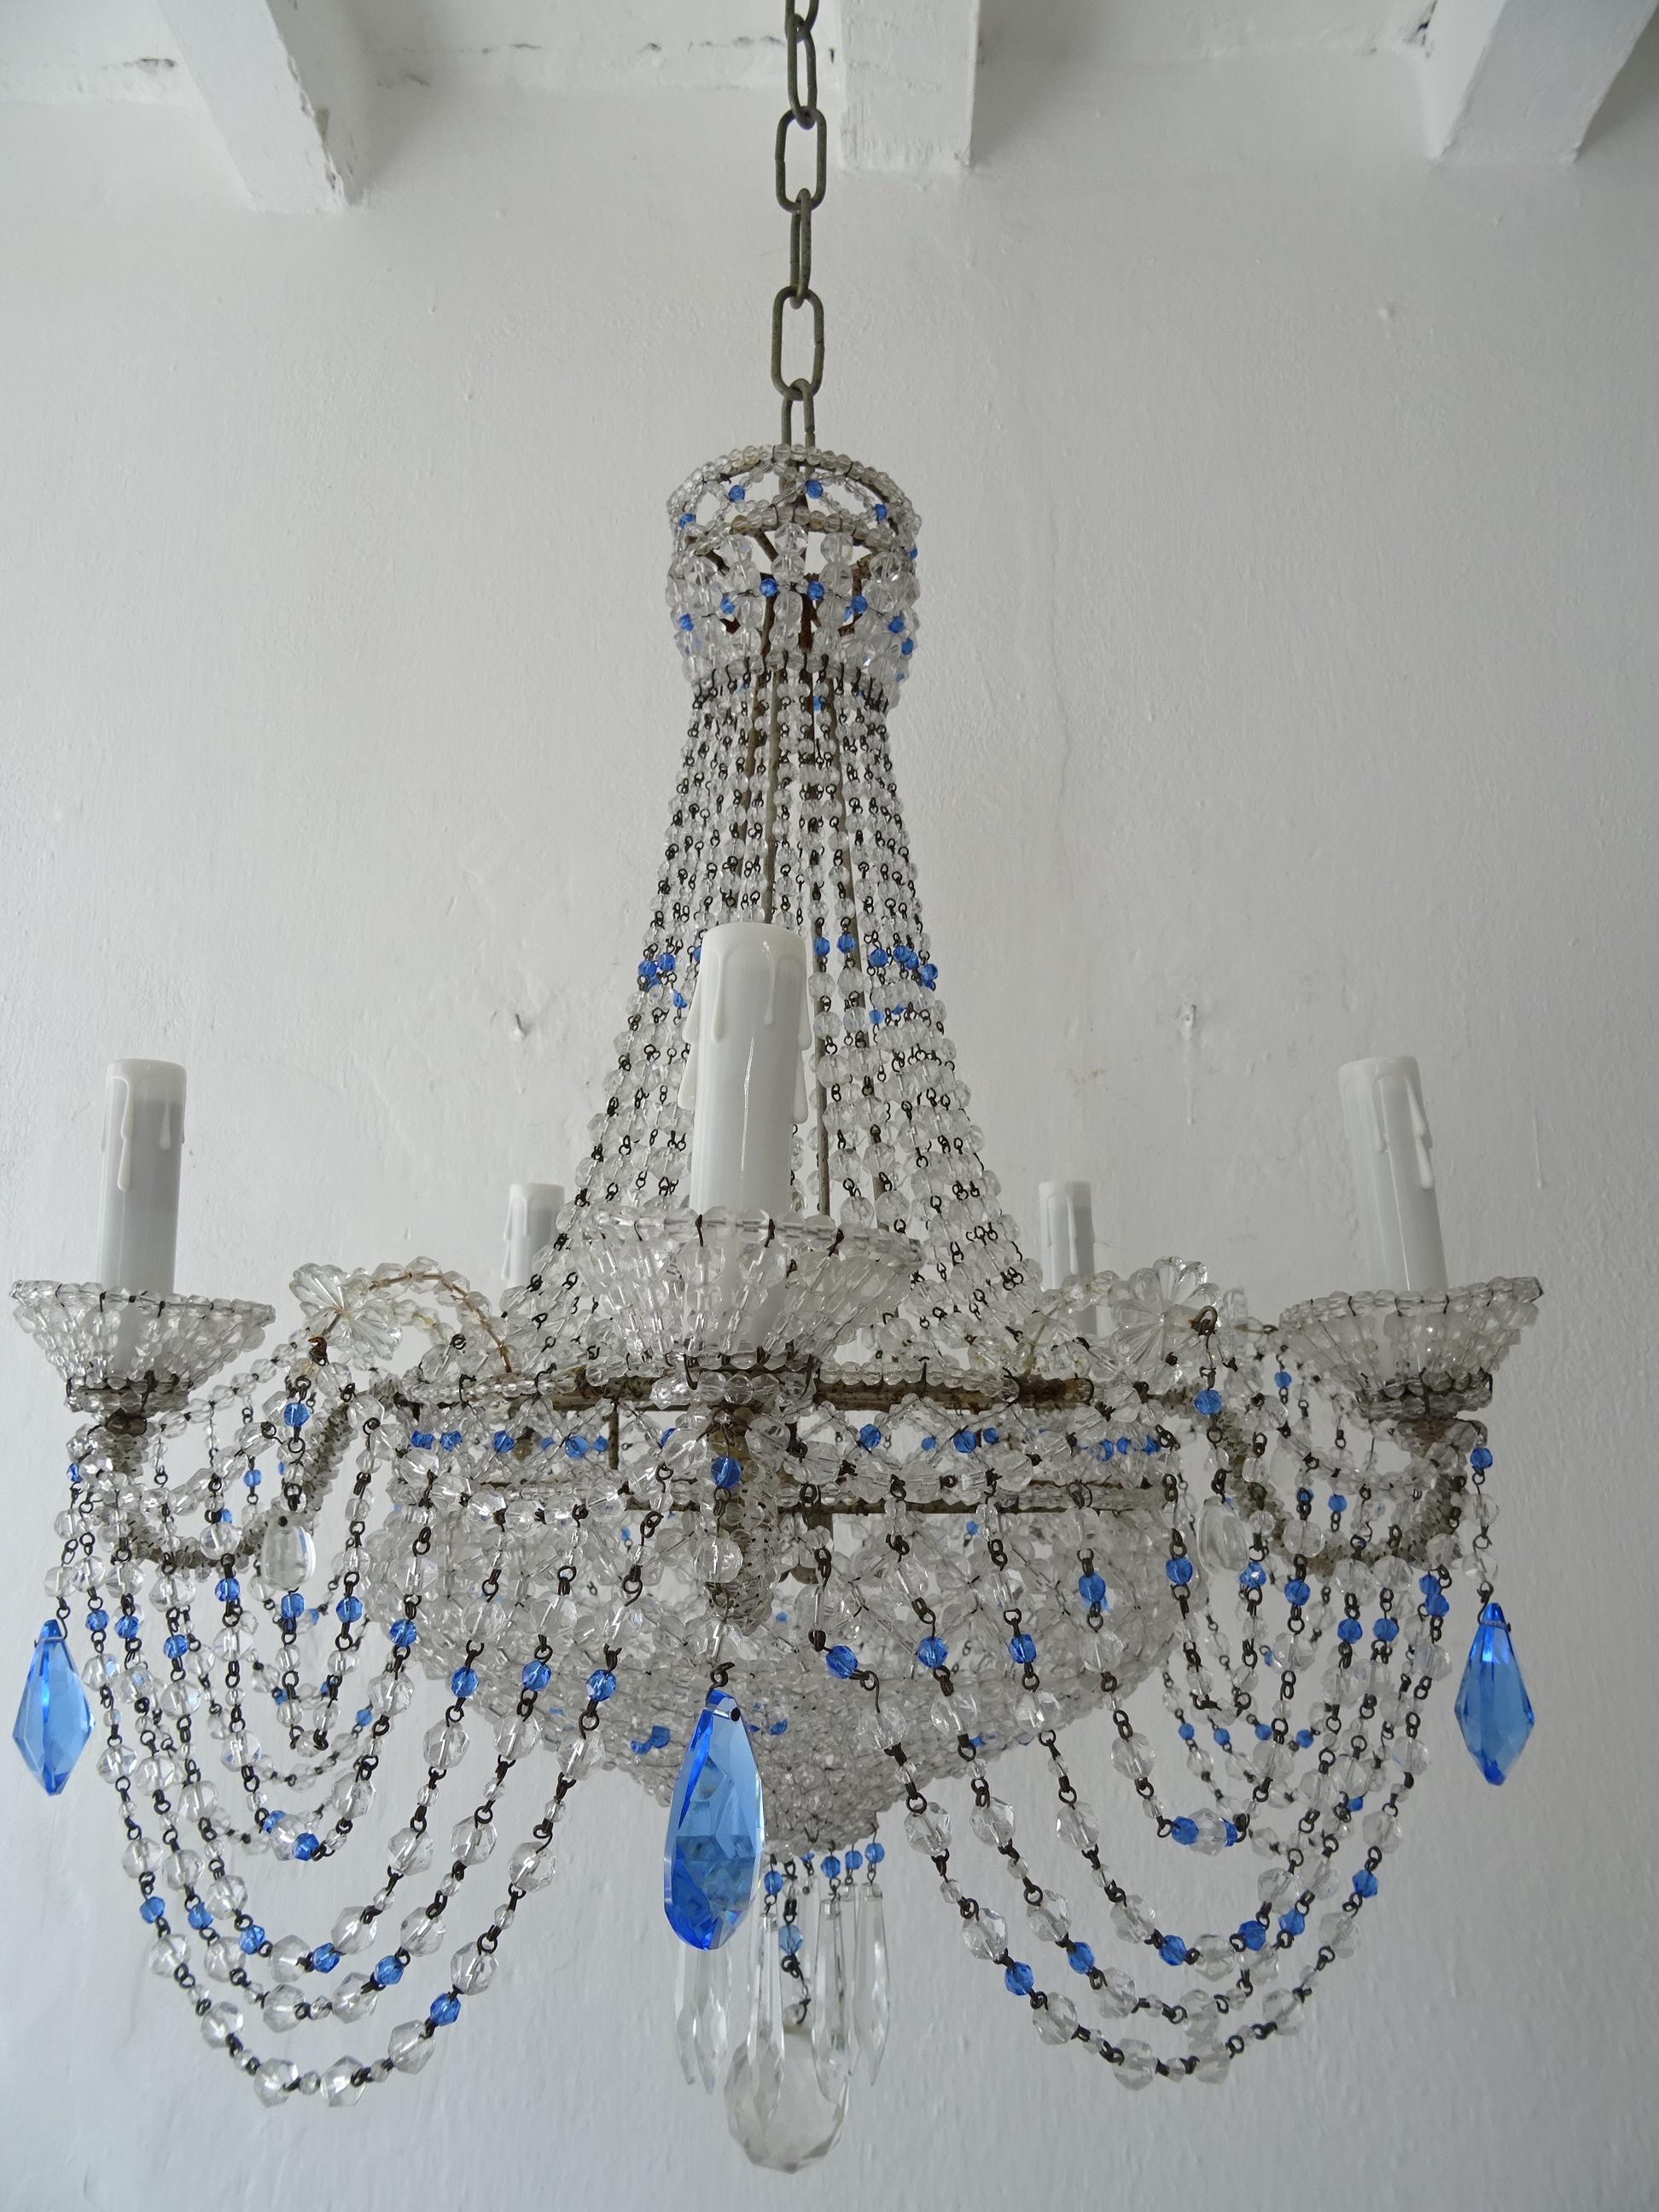 1940s Italian Completely Beaded Basket Cobalt Blue Accents Chandelier, C 1920 In Good Condition For Sale In Firenze, Toscana